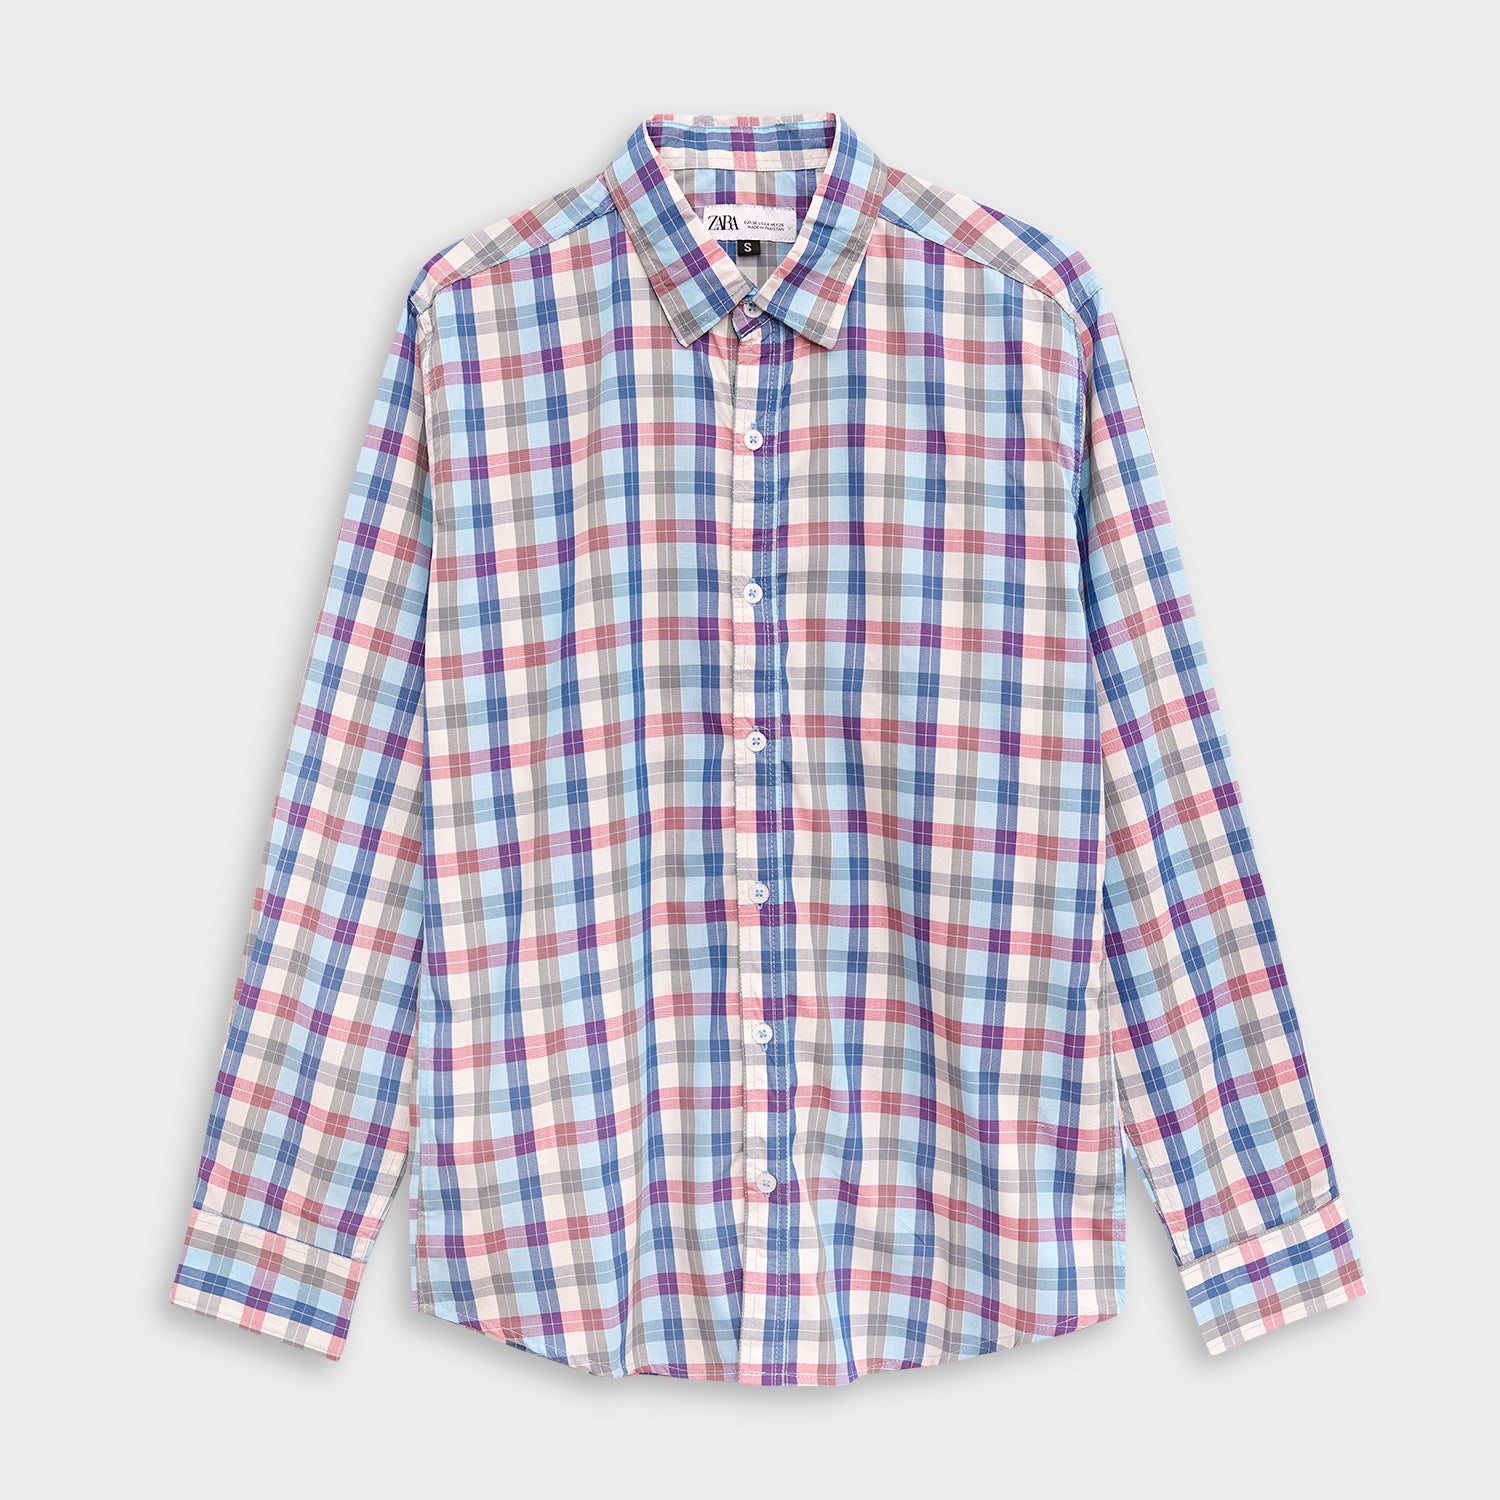 Multicolor Plaid Check Casual Shirts For Men's